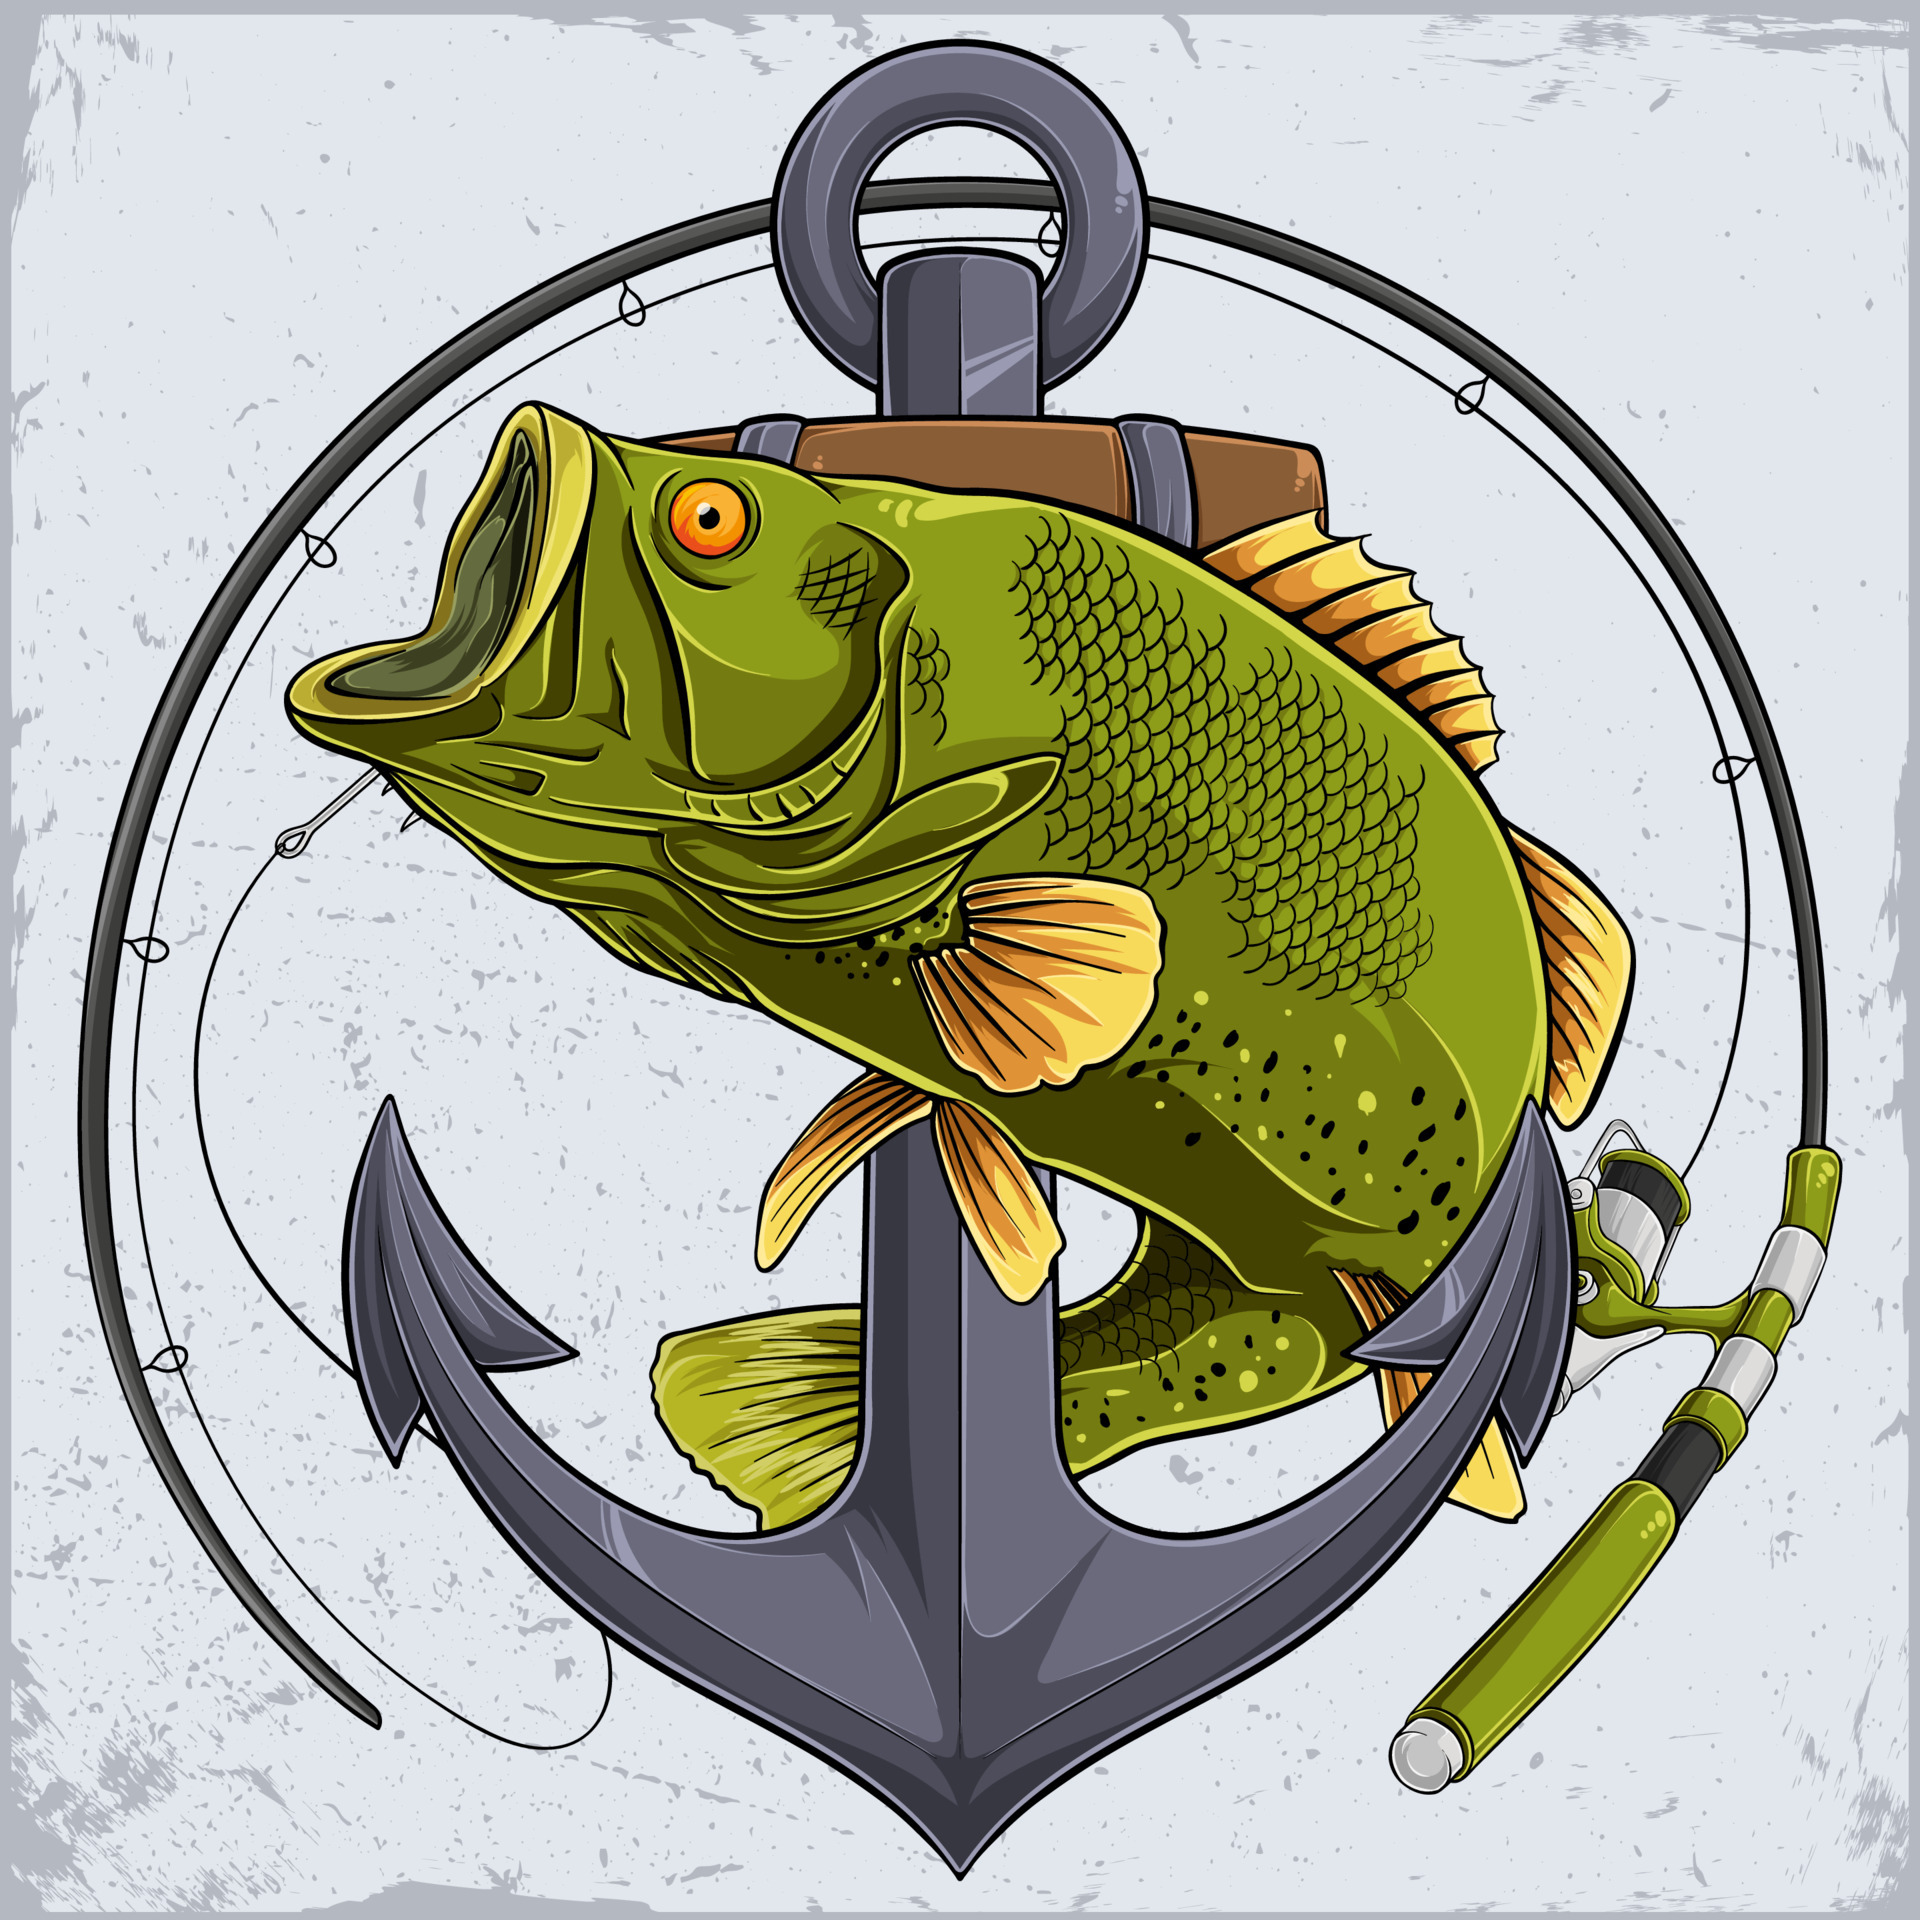 https://static.vecteezy.com/system/resources/previews/004/936/831/original/vintage-fishing-poster-with-largemouth-bass-fish-old-anchor-and-fishing-rod-vector.jpg